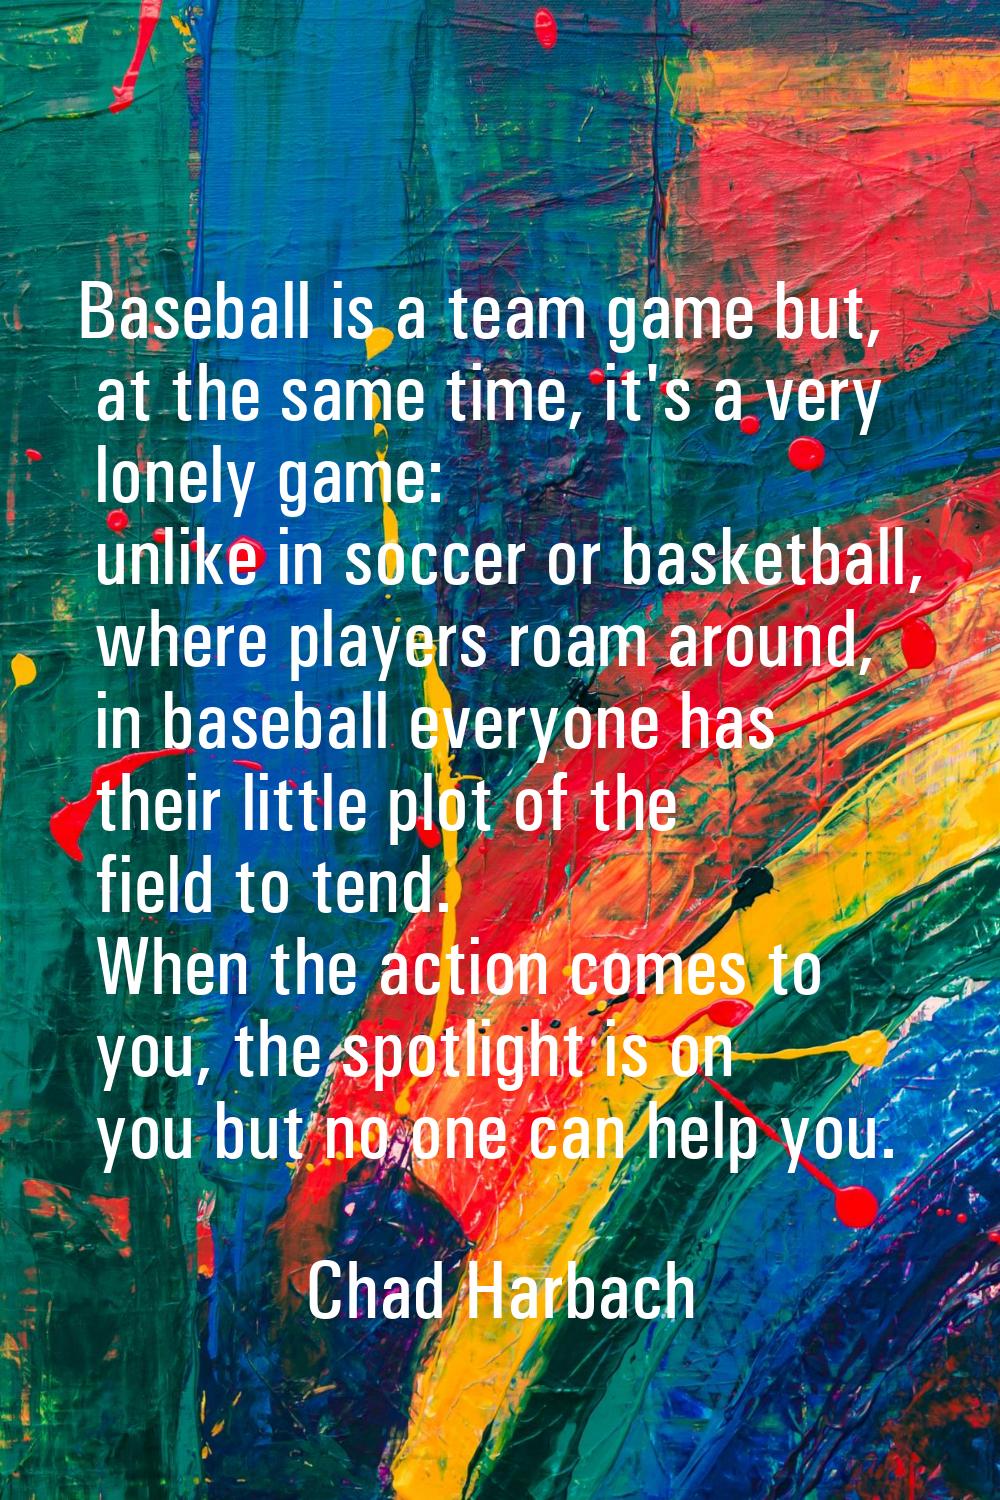 Baseball is a team game but, at the same time, it's a very lonely game: unlike in soccer or basketb